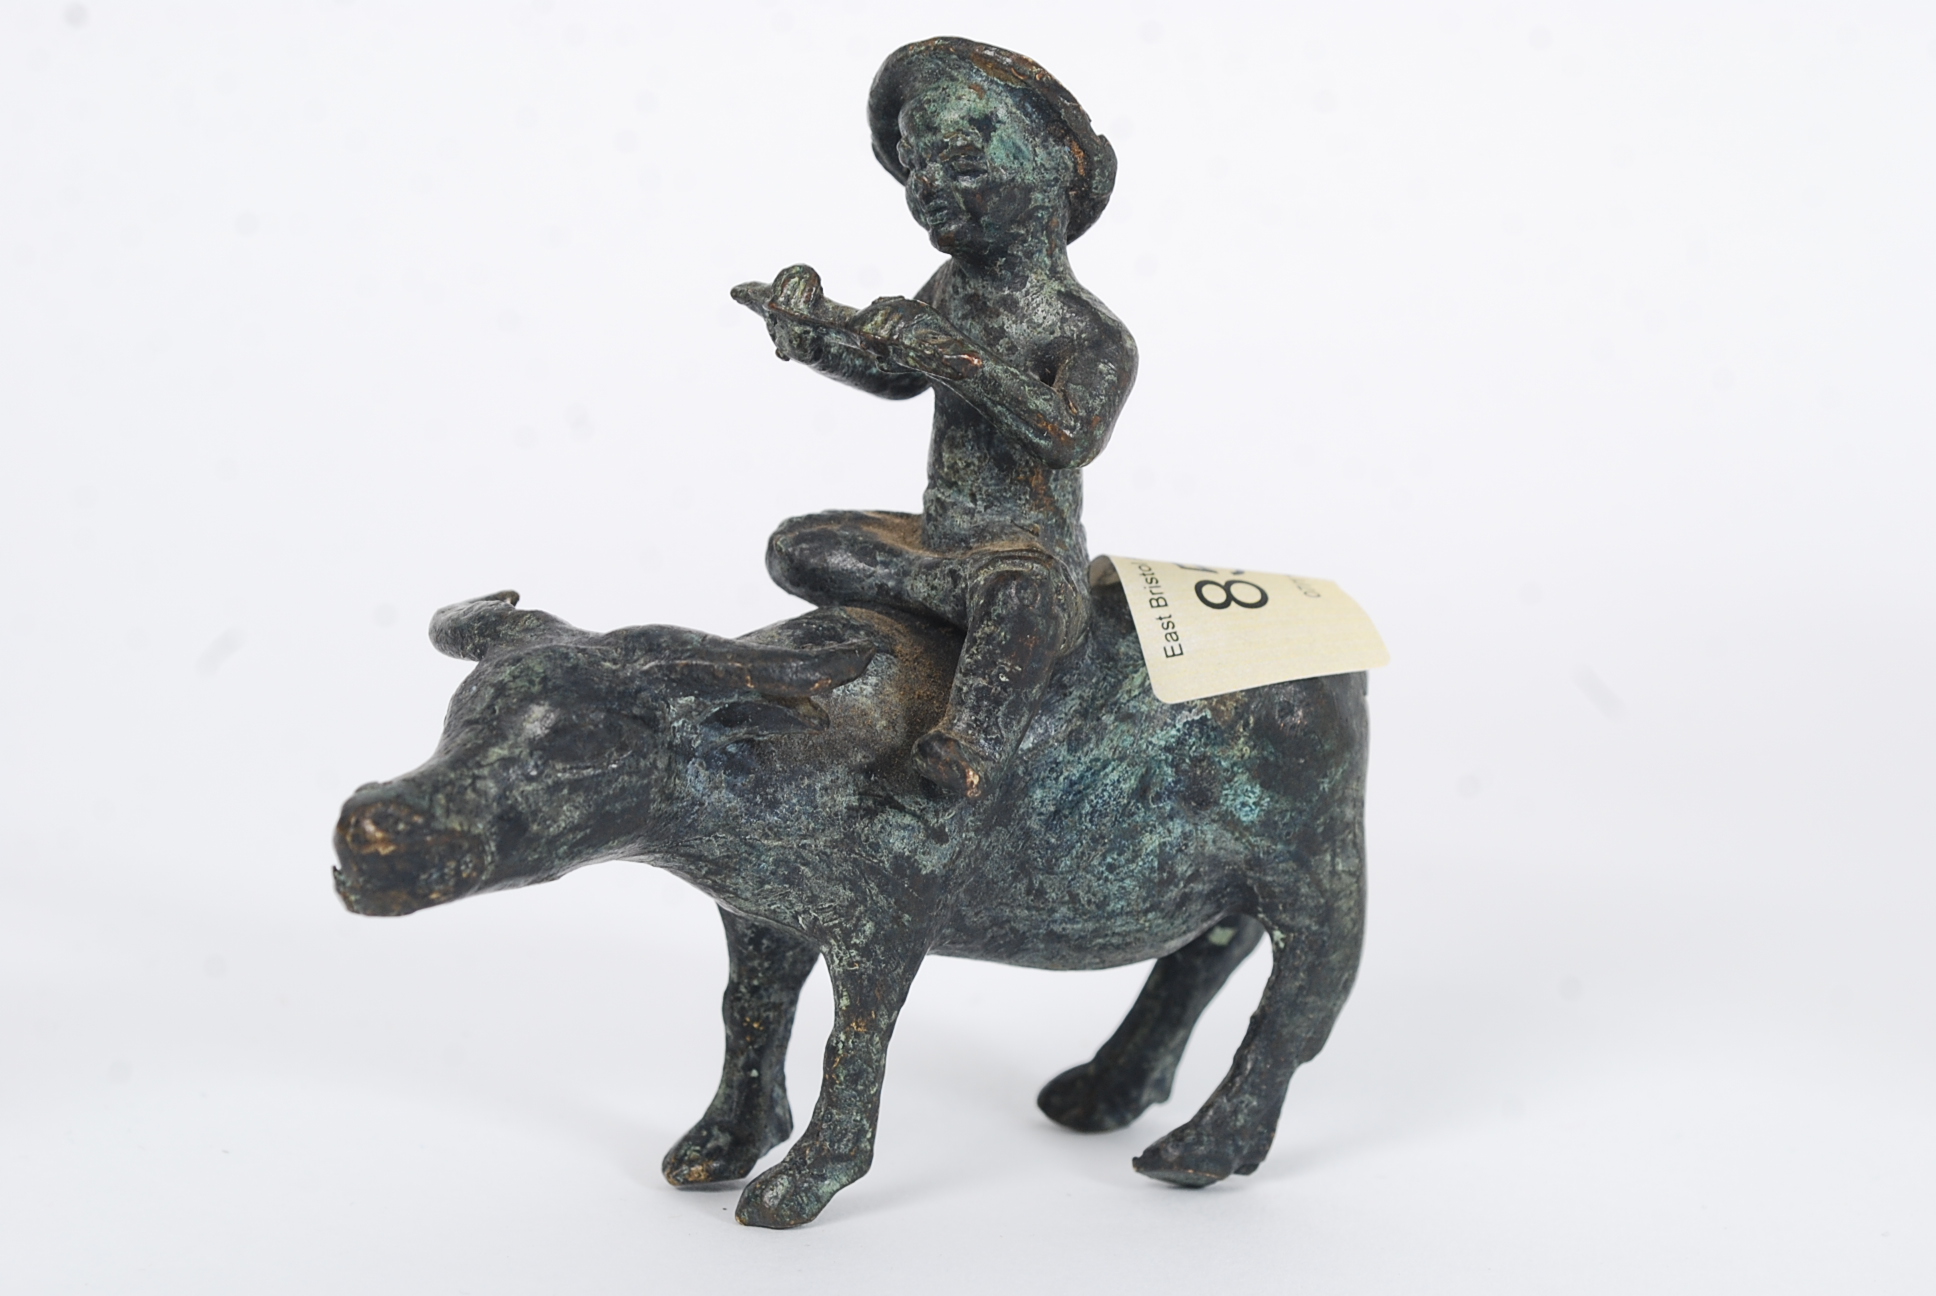 A 19th century bronze figure of a boy riding a cow. Chinese. 11cm tall.